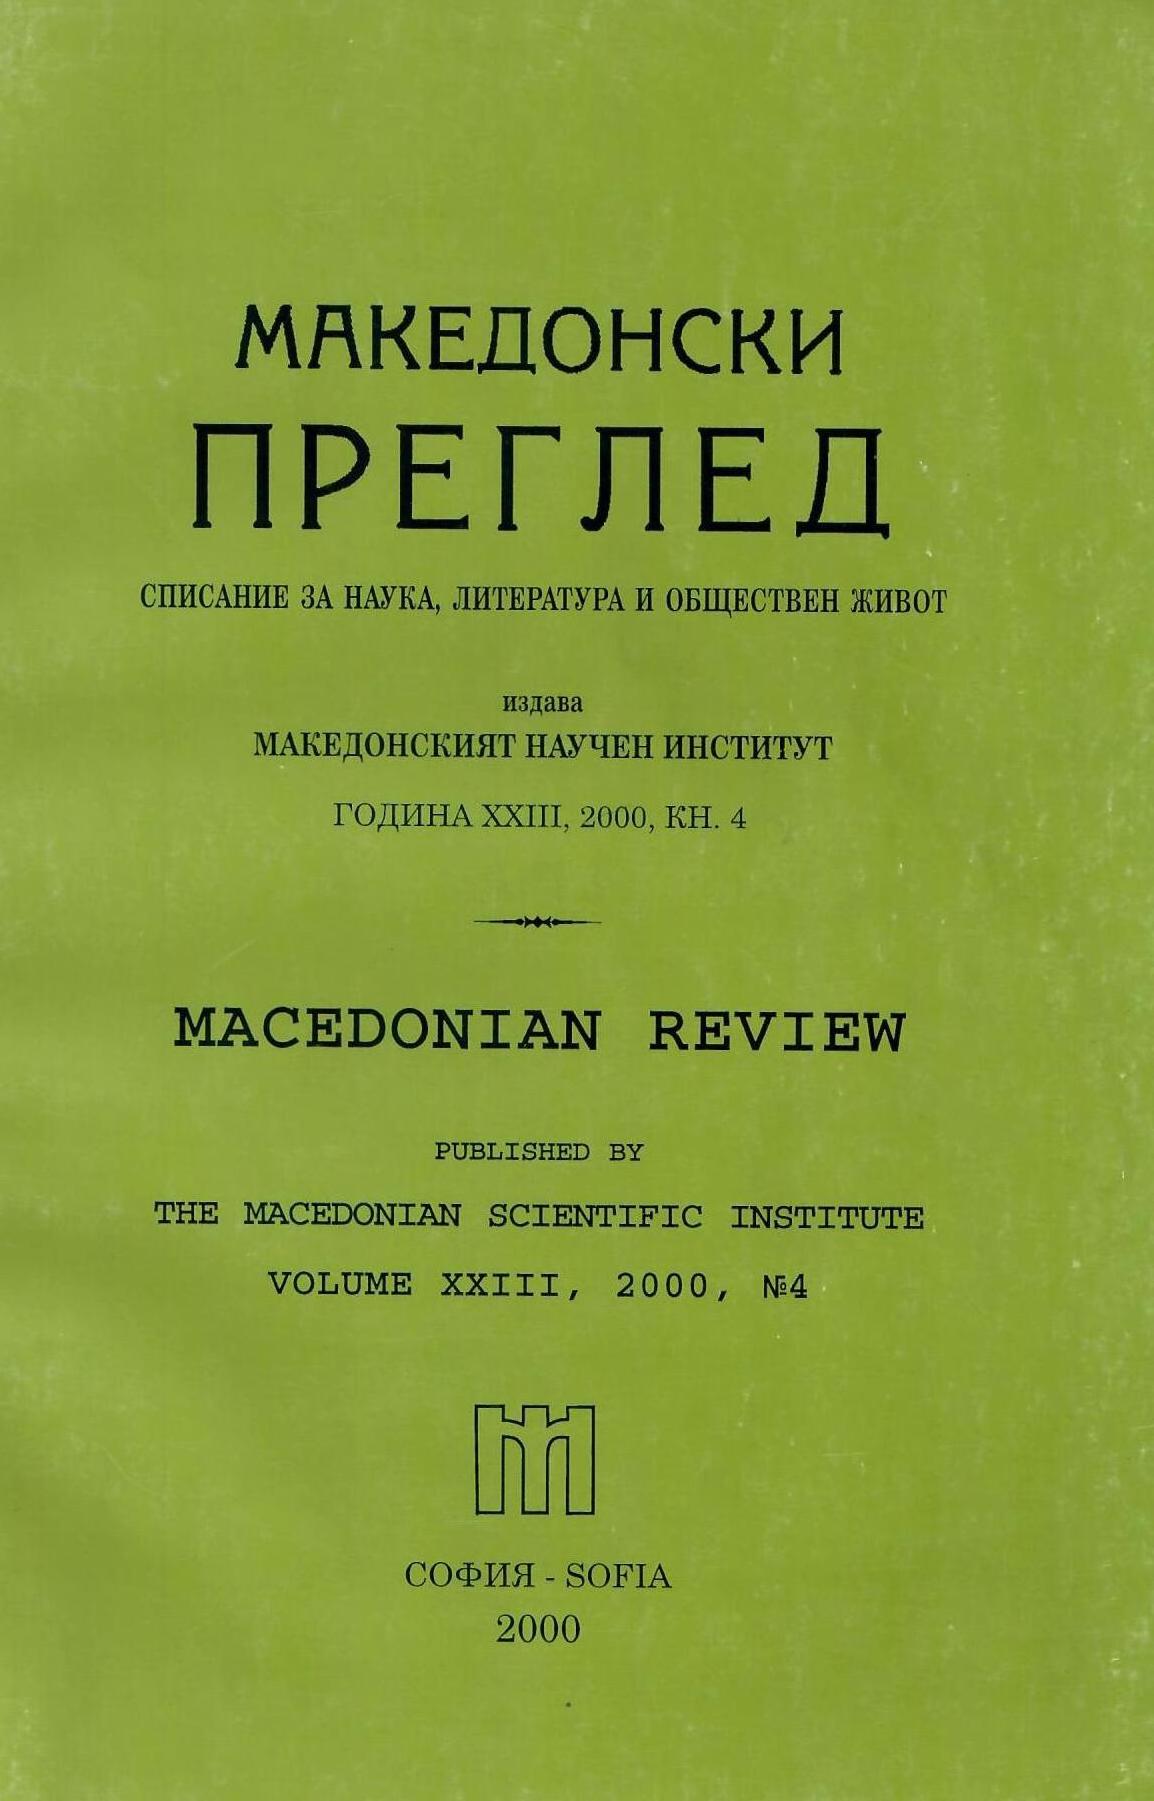 The Crisis in Relations between the Internal Macedonian-Adrianople Revolutionary Organization and the Supreme Macedono-Adrianople Committee in the Dupnitsa region (1900-1903) Cover Image